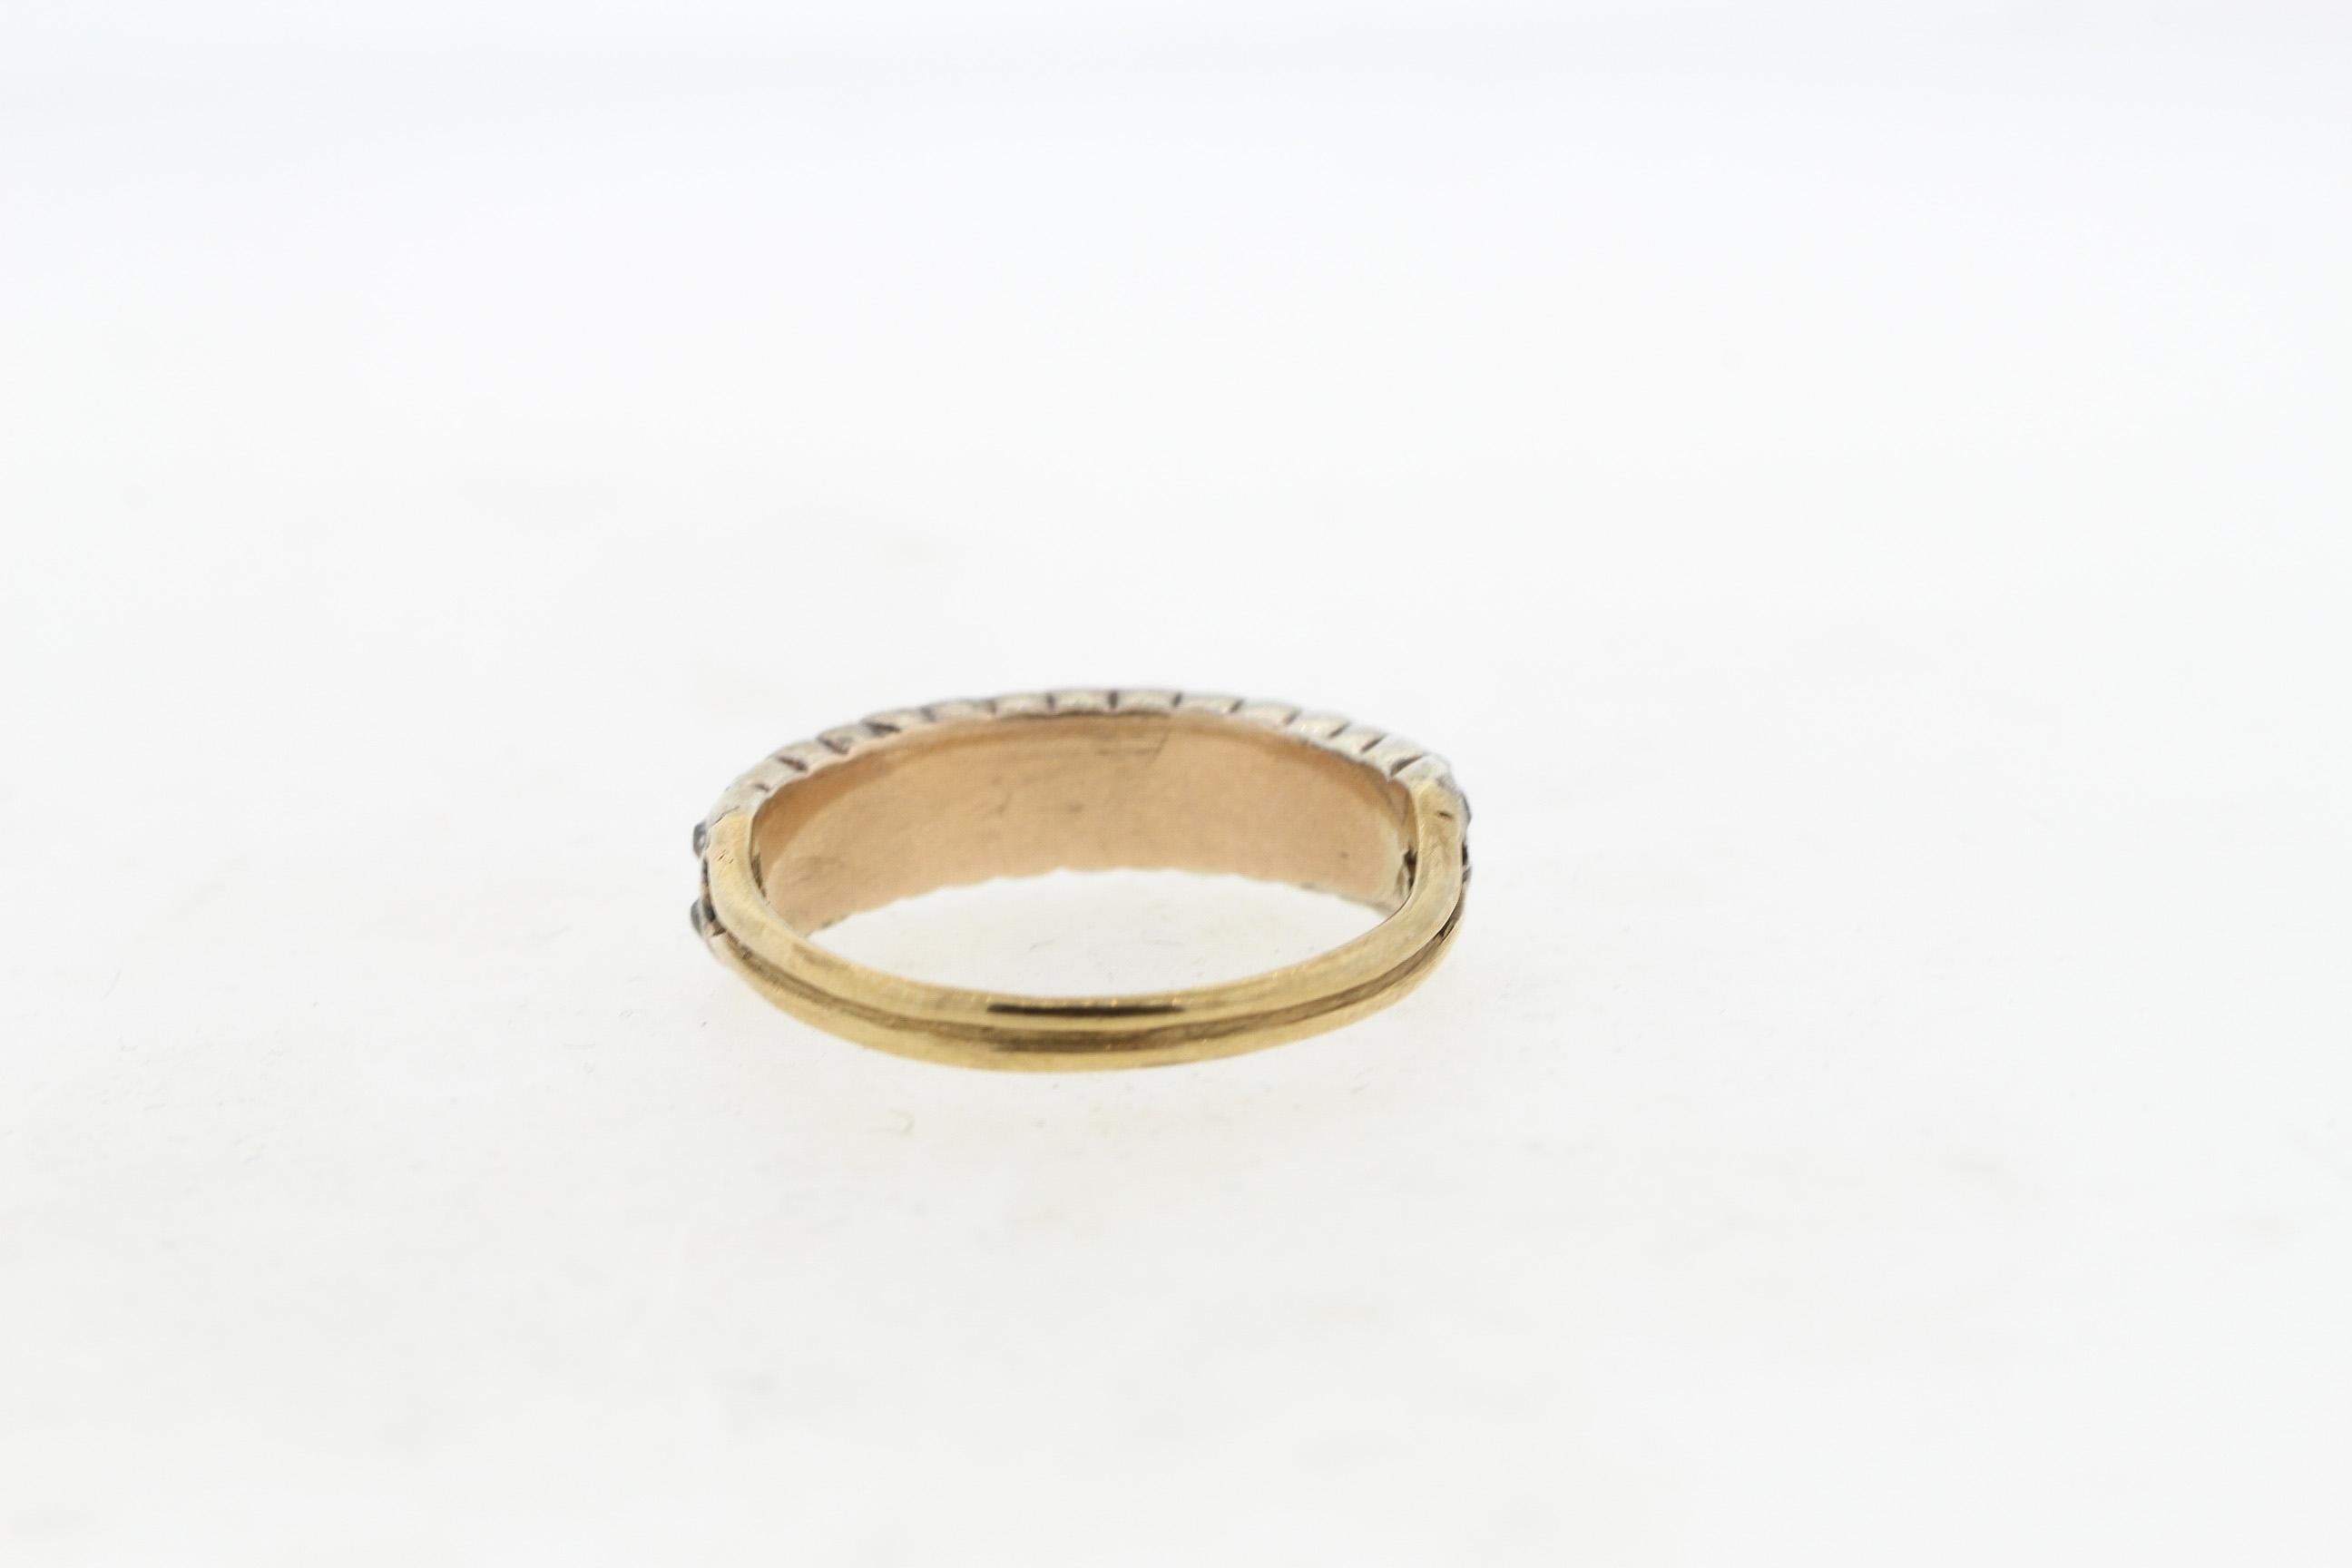 Antique Georgian 15k gold and silver old cut diamond stacking ring, circa 1800. This wearable band is set with 32 Old mine cut diamonds weighing approximately 0.80 carats total. The diamonds are set in a closed back setting, as is typical with